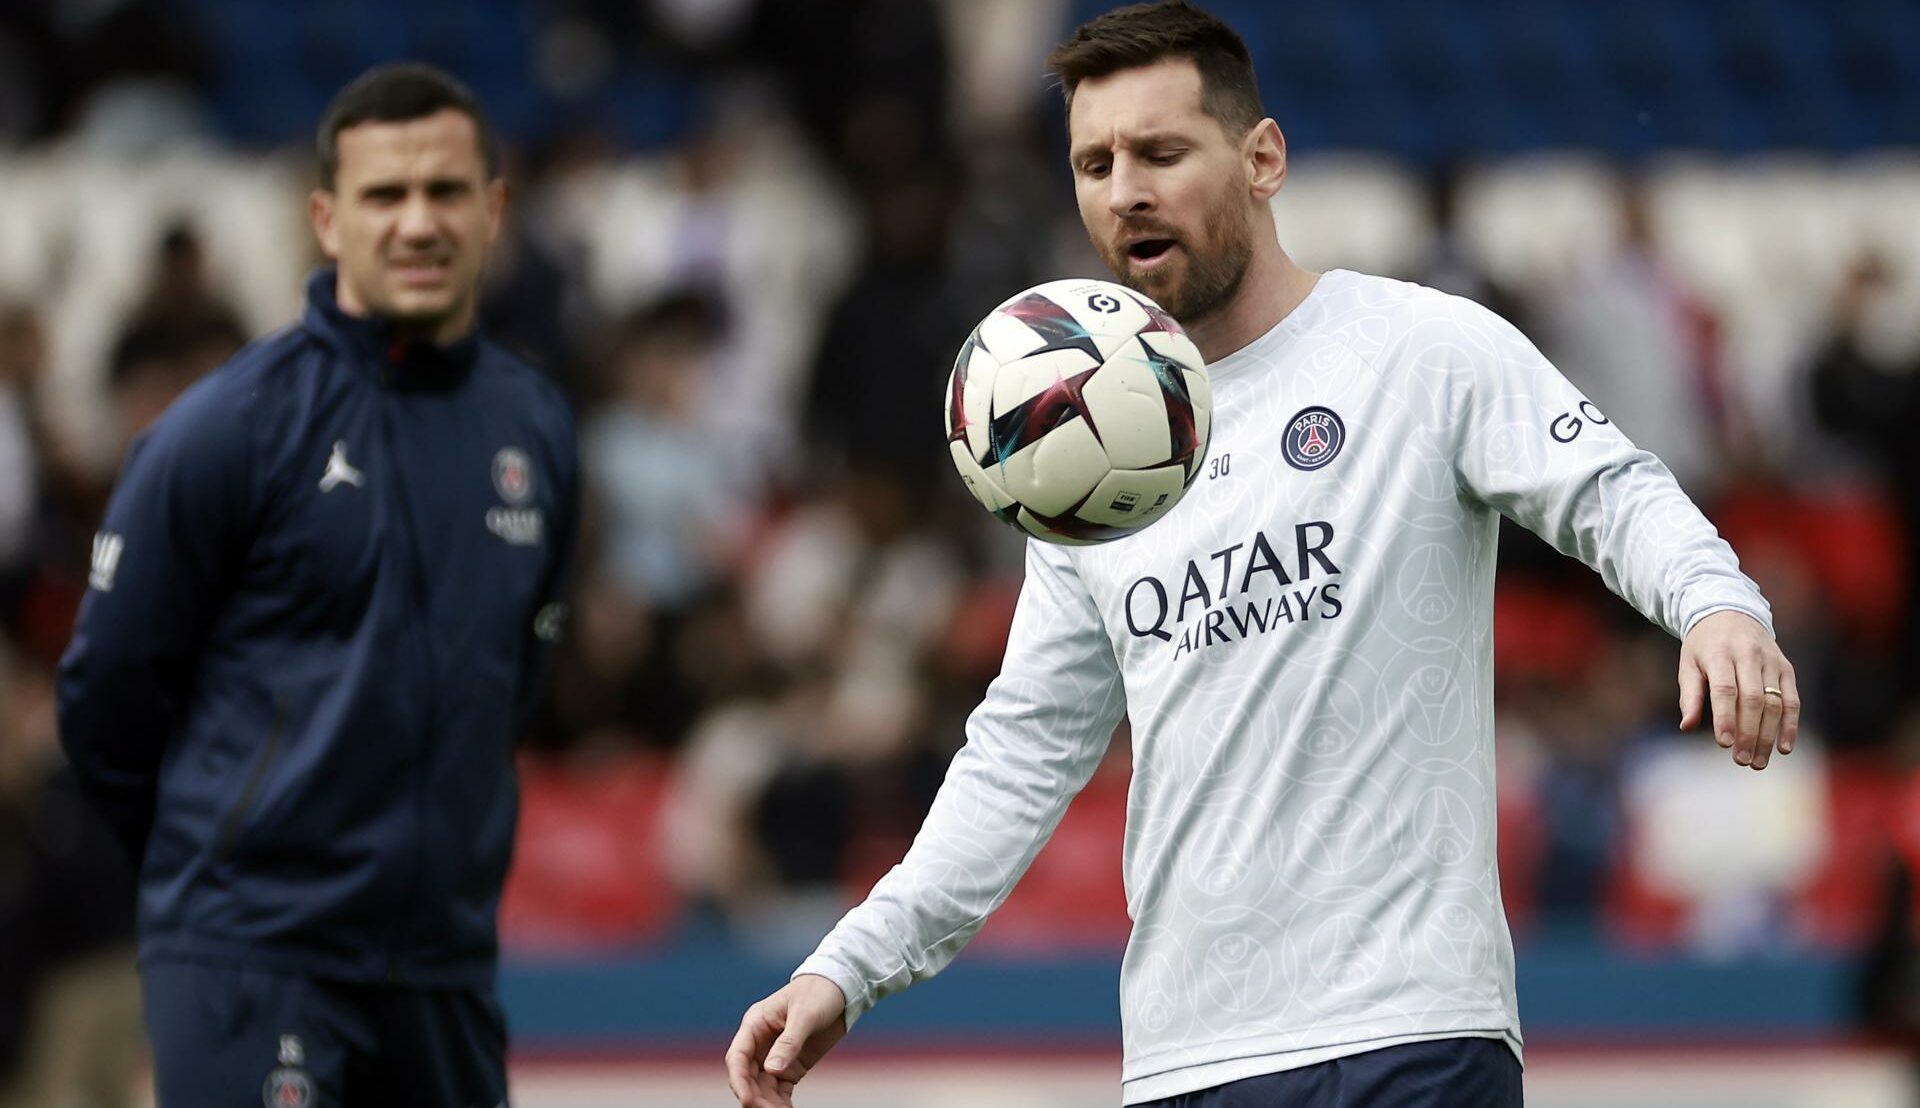 A group of fans demands changes in Lionel Messi's PSG - Time News